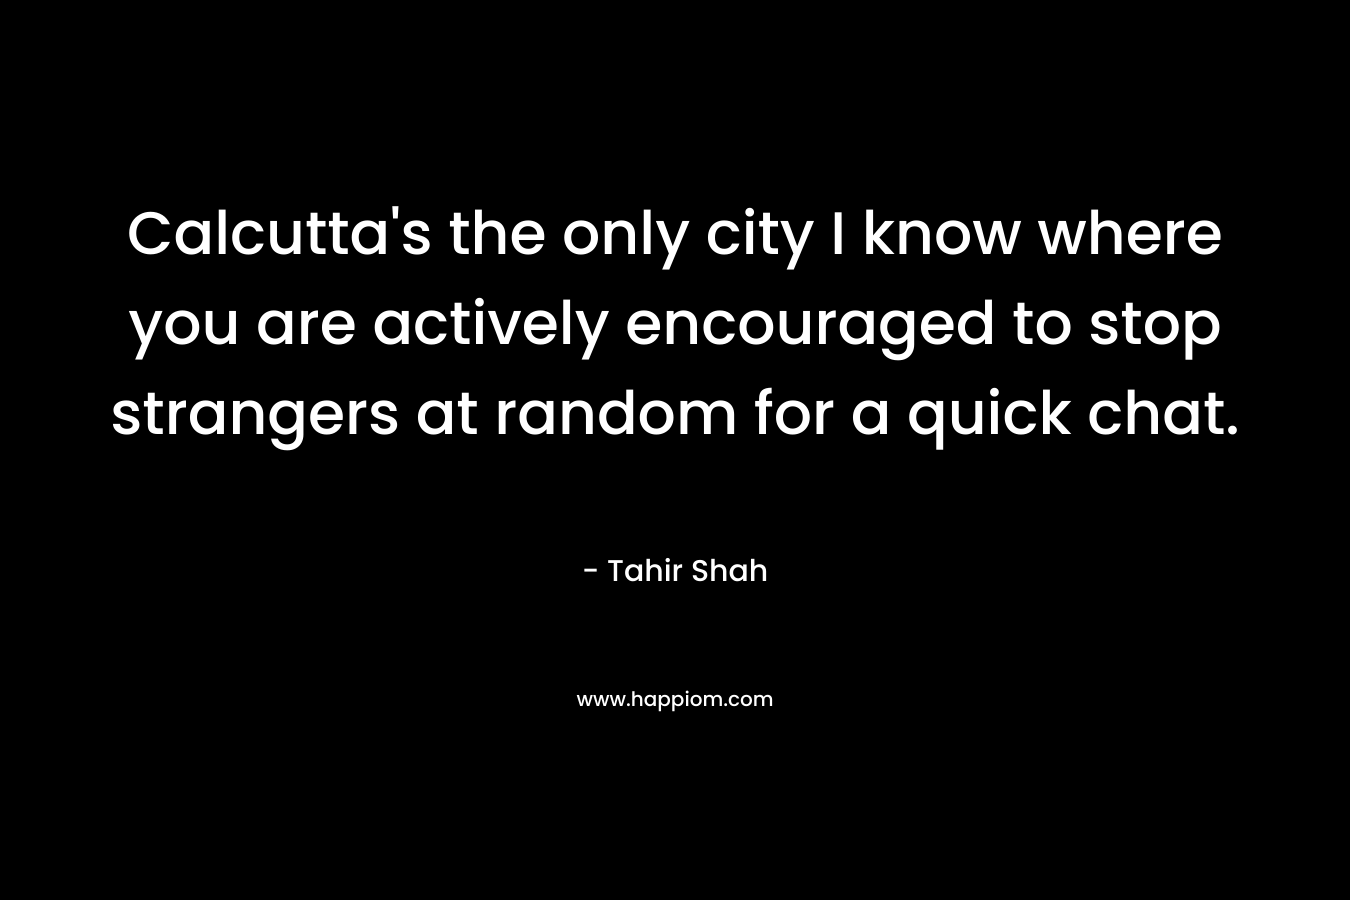 Calcutta’s the only city I know where you are actively encouraged to stop strangers at random for a quick chat. – Tahir Shah